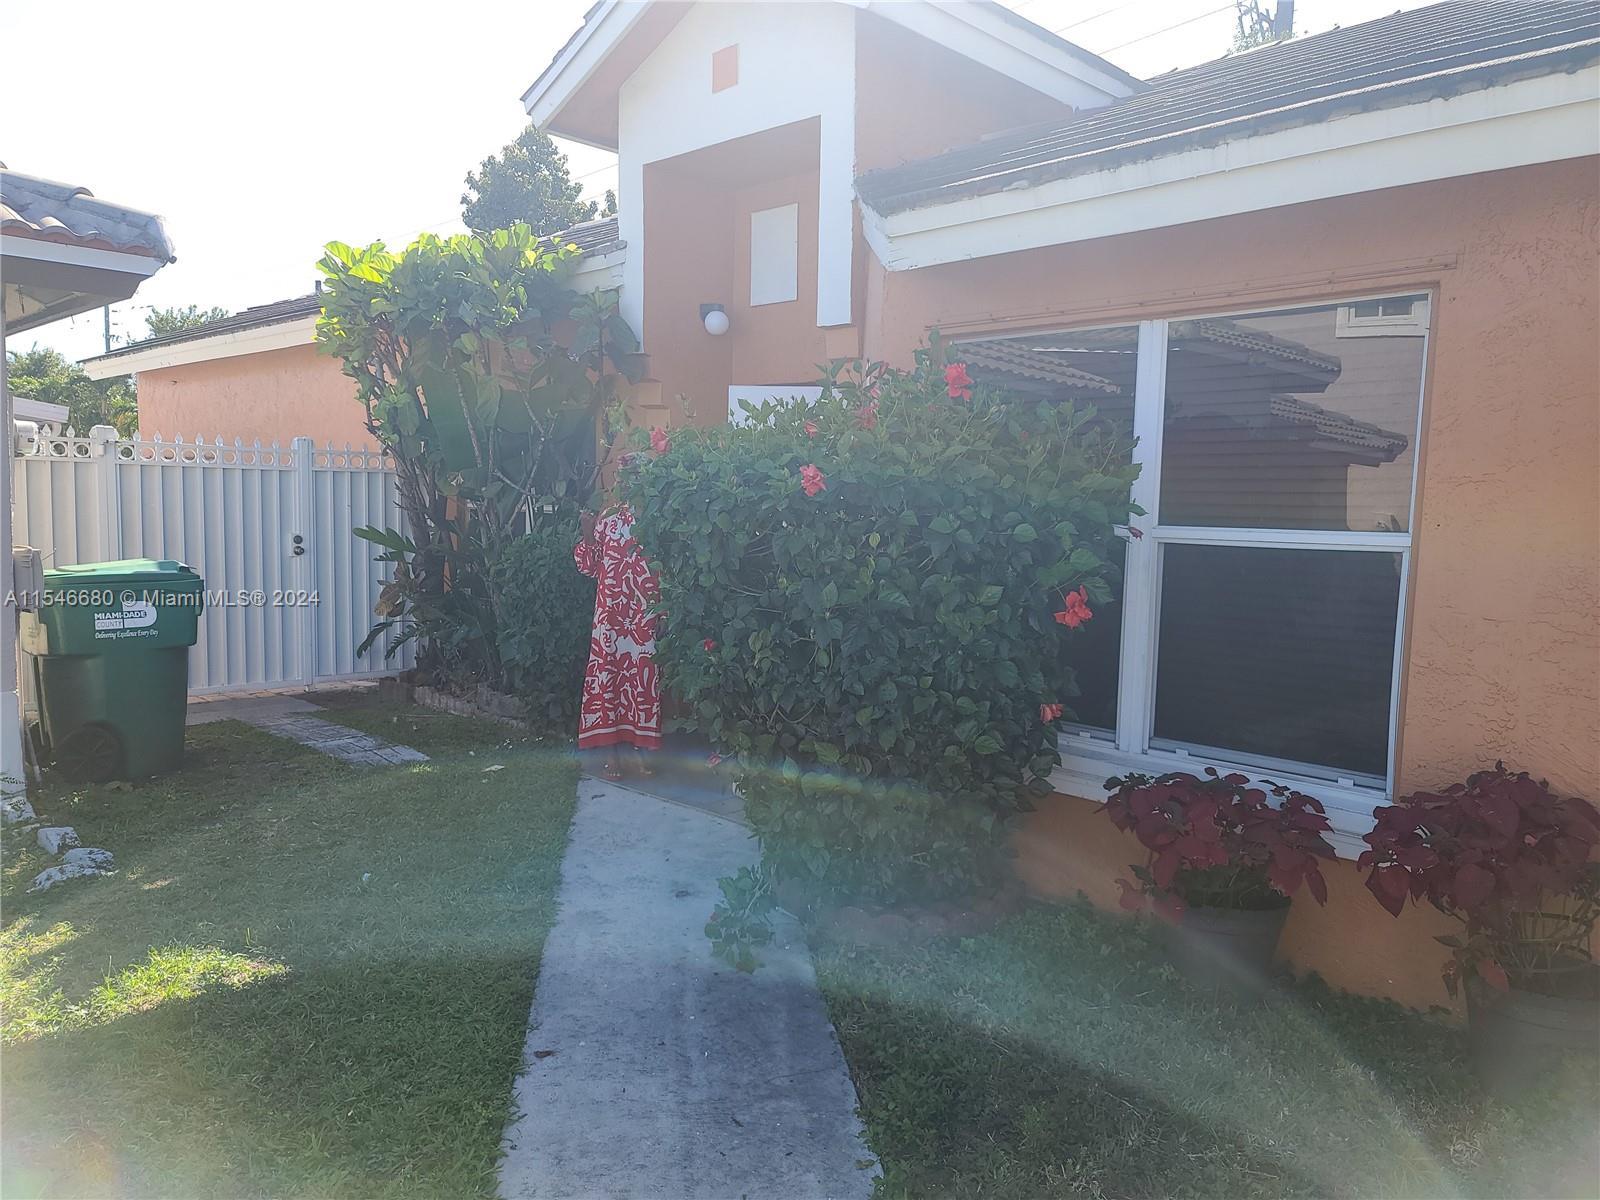 Photo of 5680 NW 187th St in Miami Gardens, FL